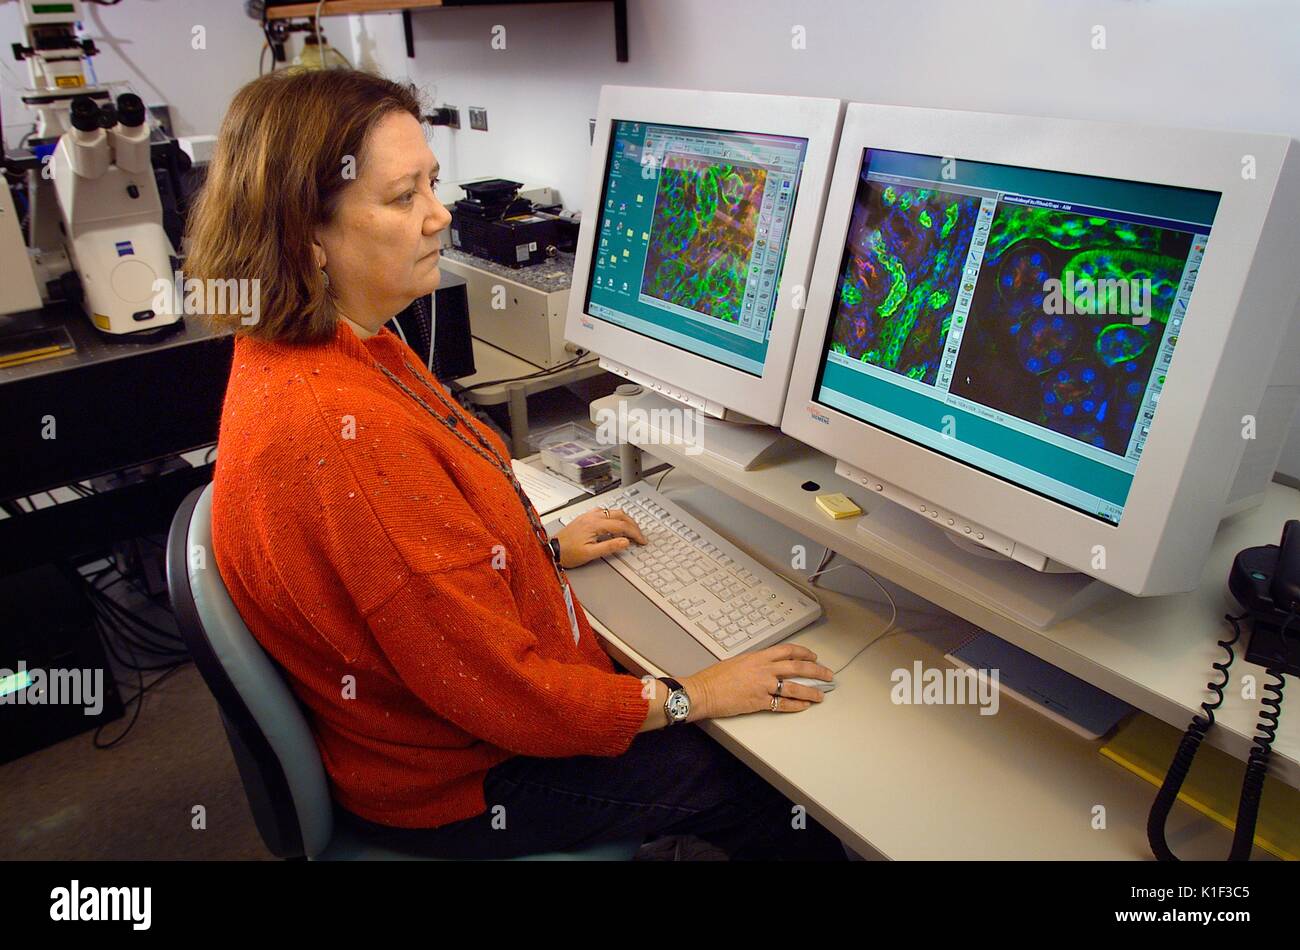 CDC scientists at work using a confocal microscope. LabScience, Using laser light, CDC laboratory scientists sometimes work with a confocal microscope when diagnosing various pathogens. Image courtesy CDC, 2002. Stock Photo